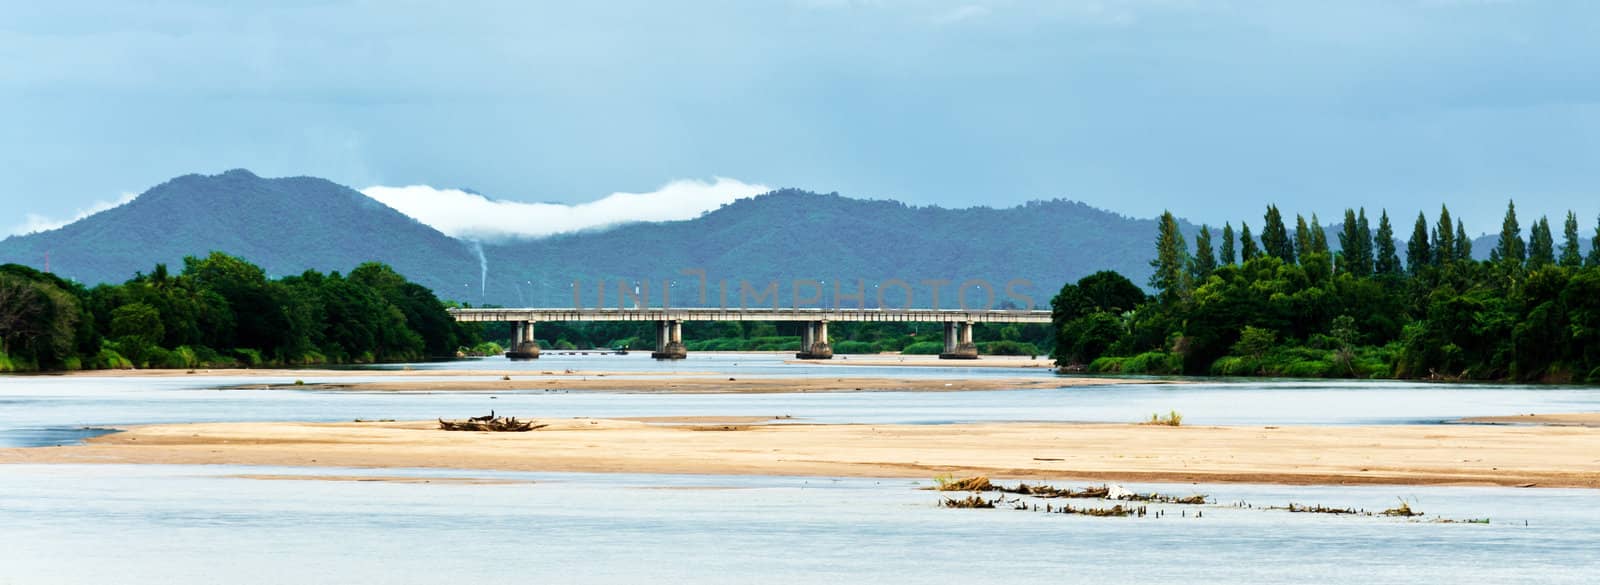 Landscape of Maping river, Tak city of Thailand